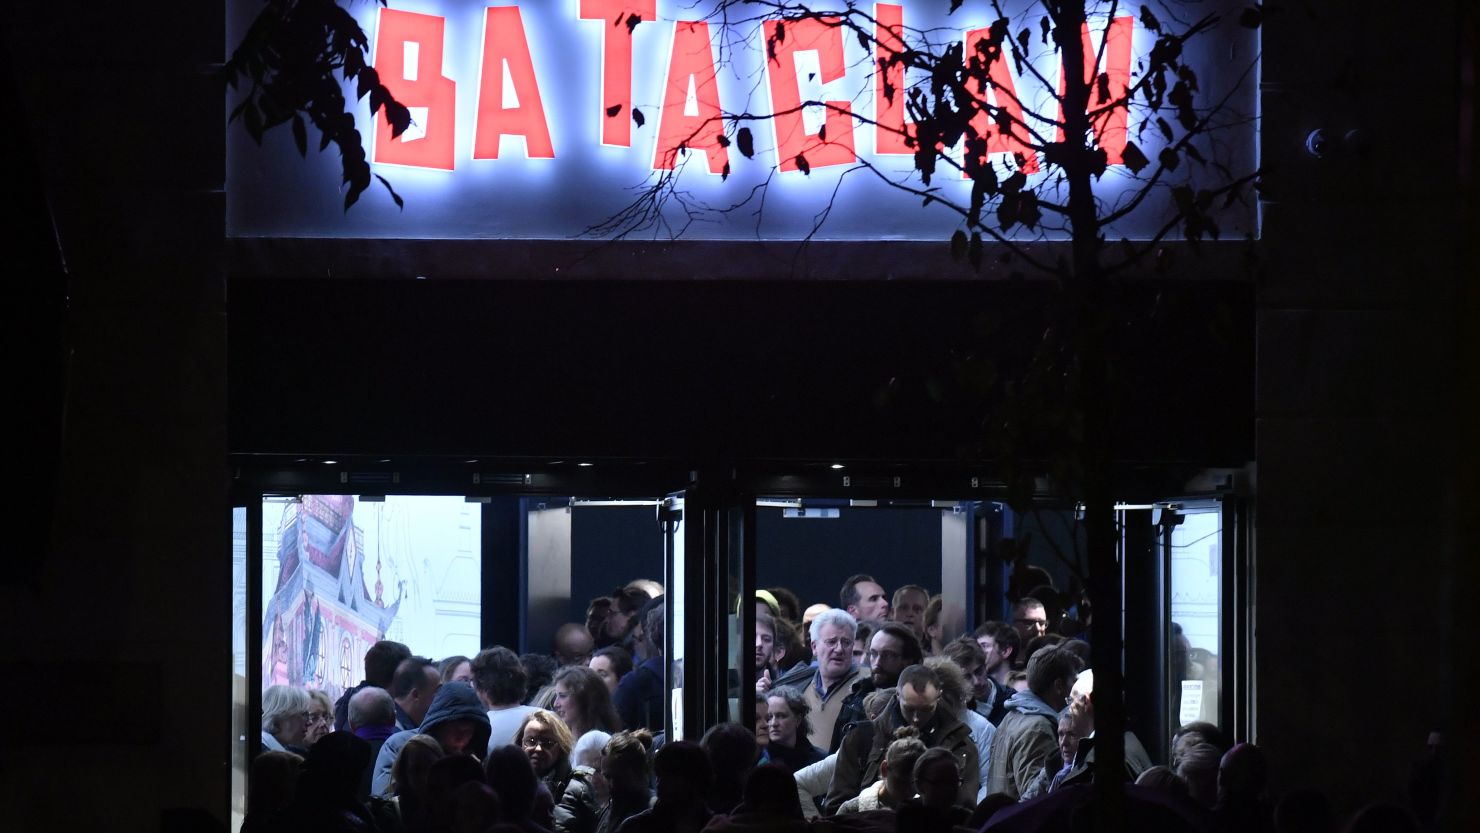 The Bataclan concert hall in Paris reopened a year after it was the scene of a terror attack.